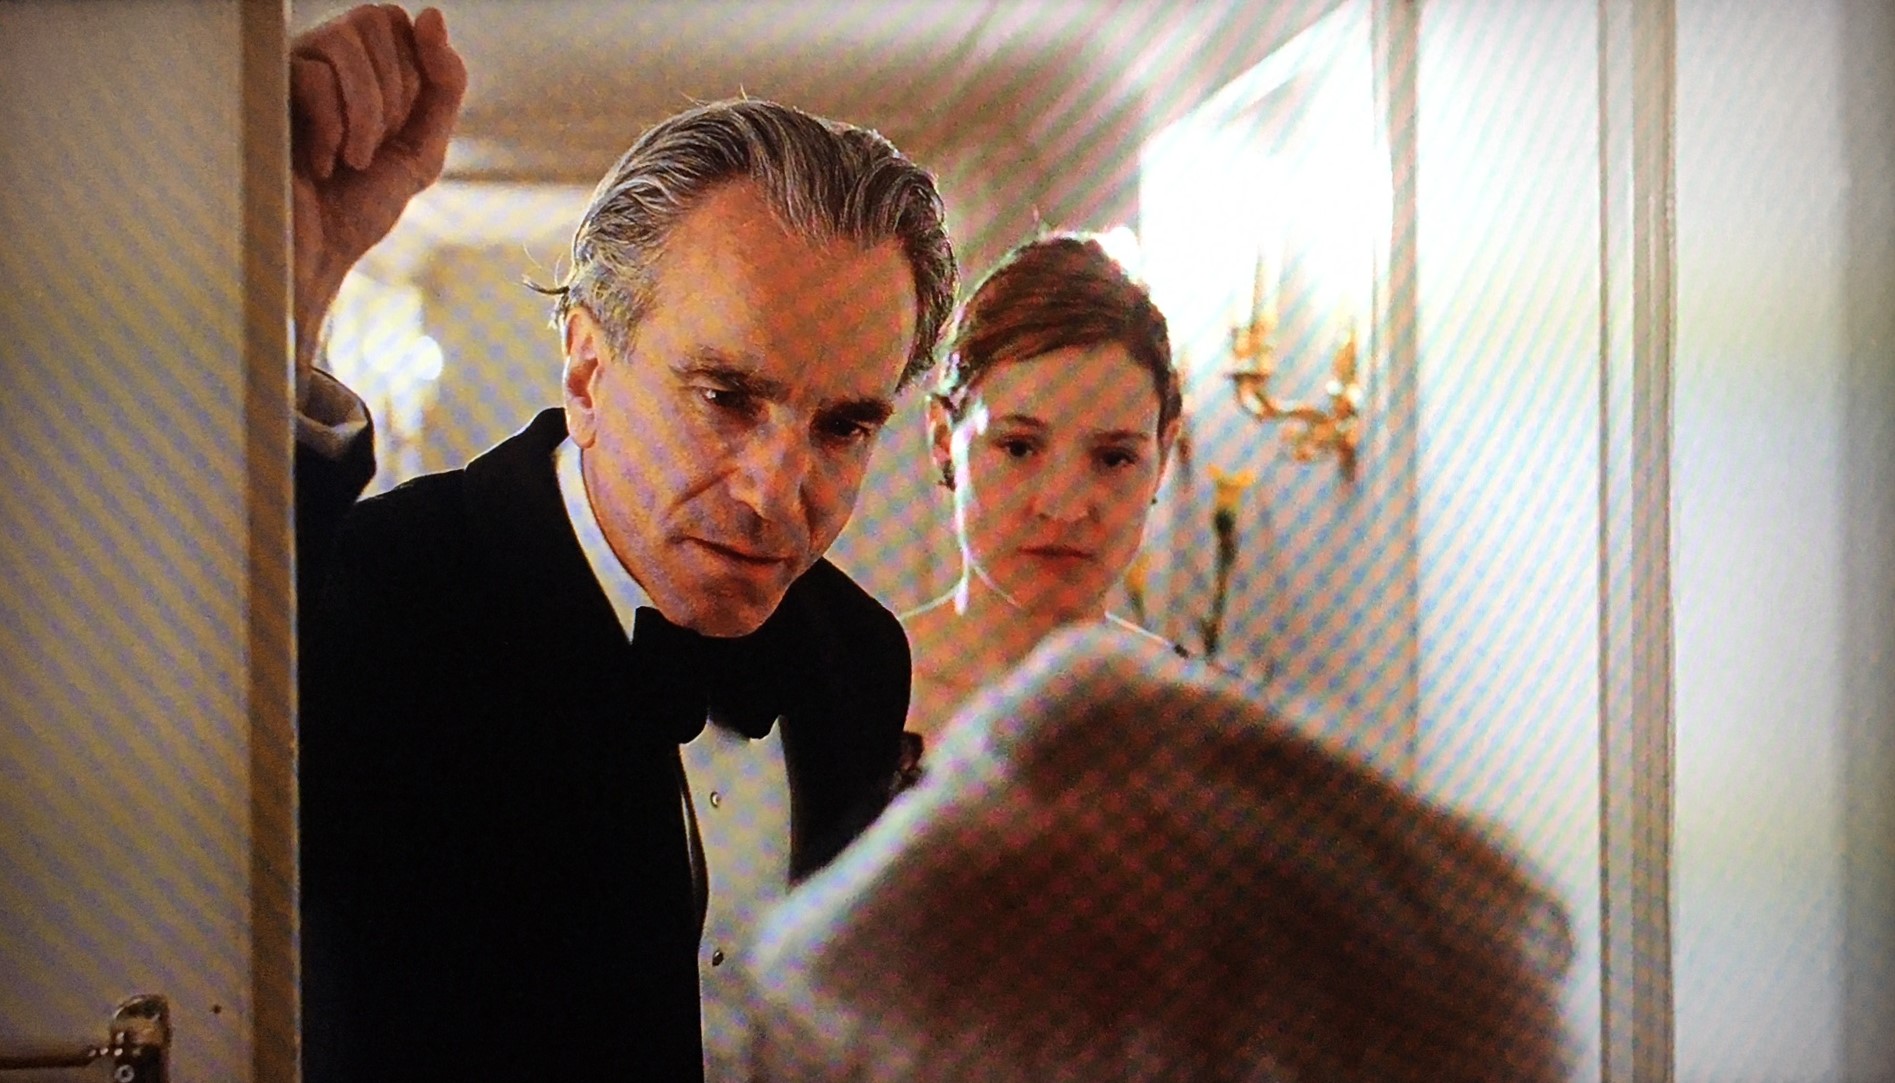 Has There Ever Been A Real Life Case Like Phantom Thread?